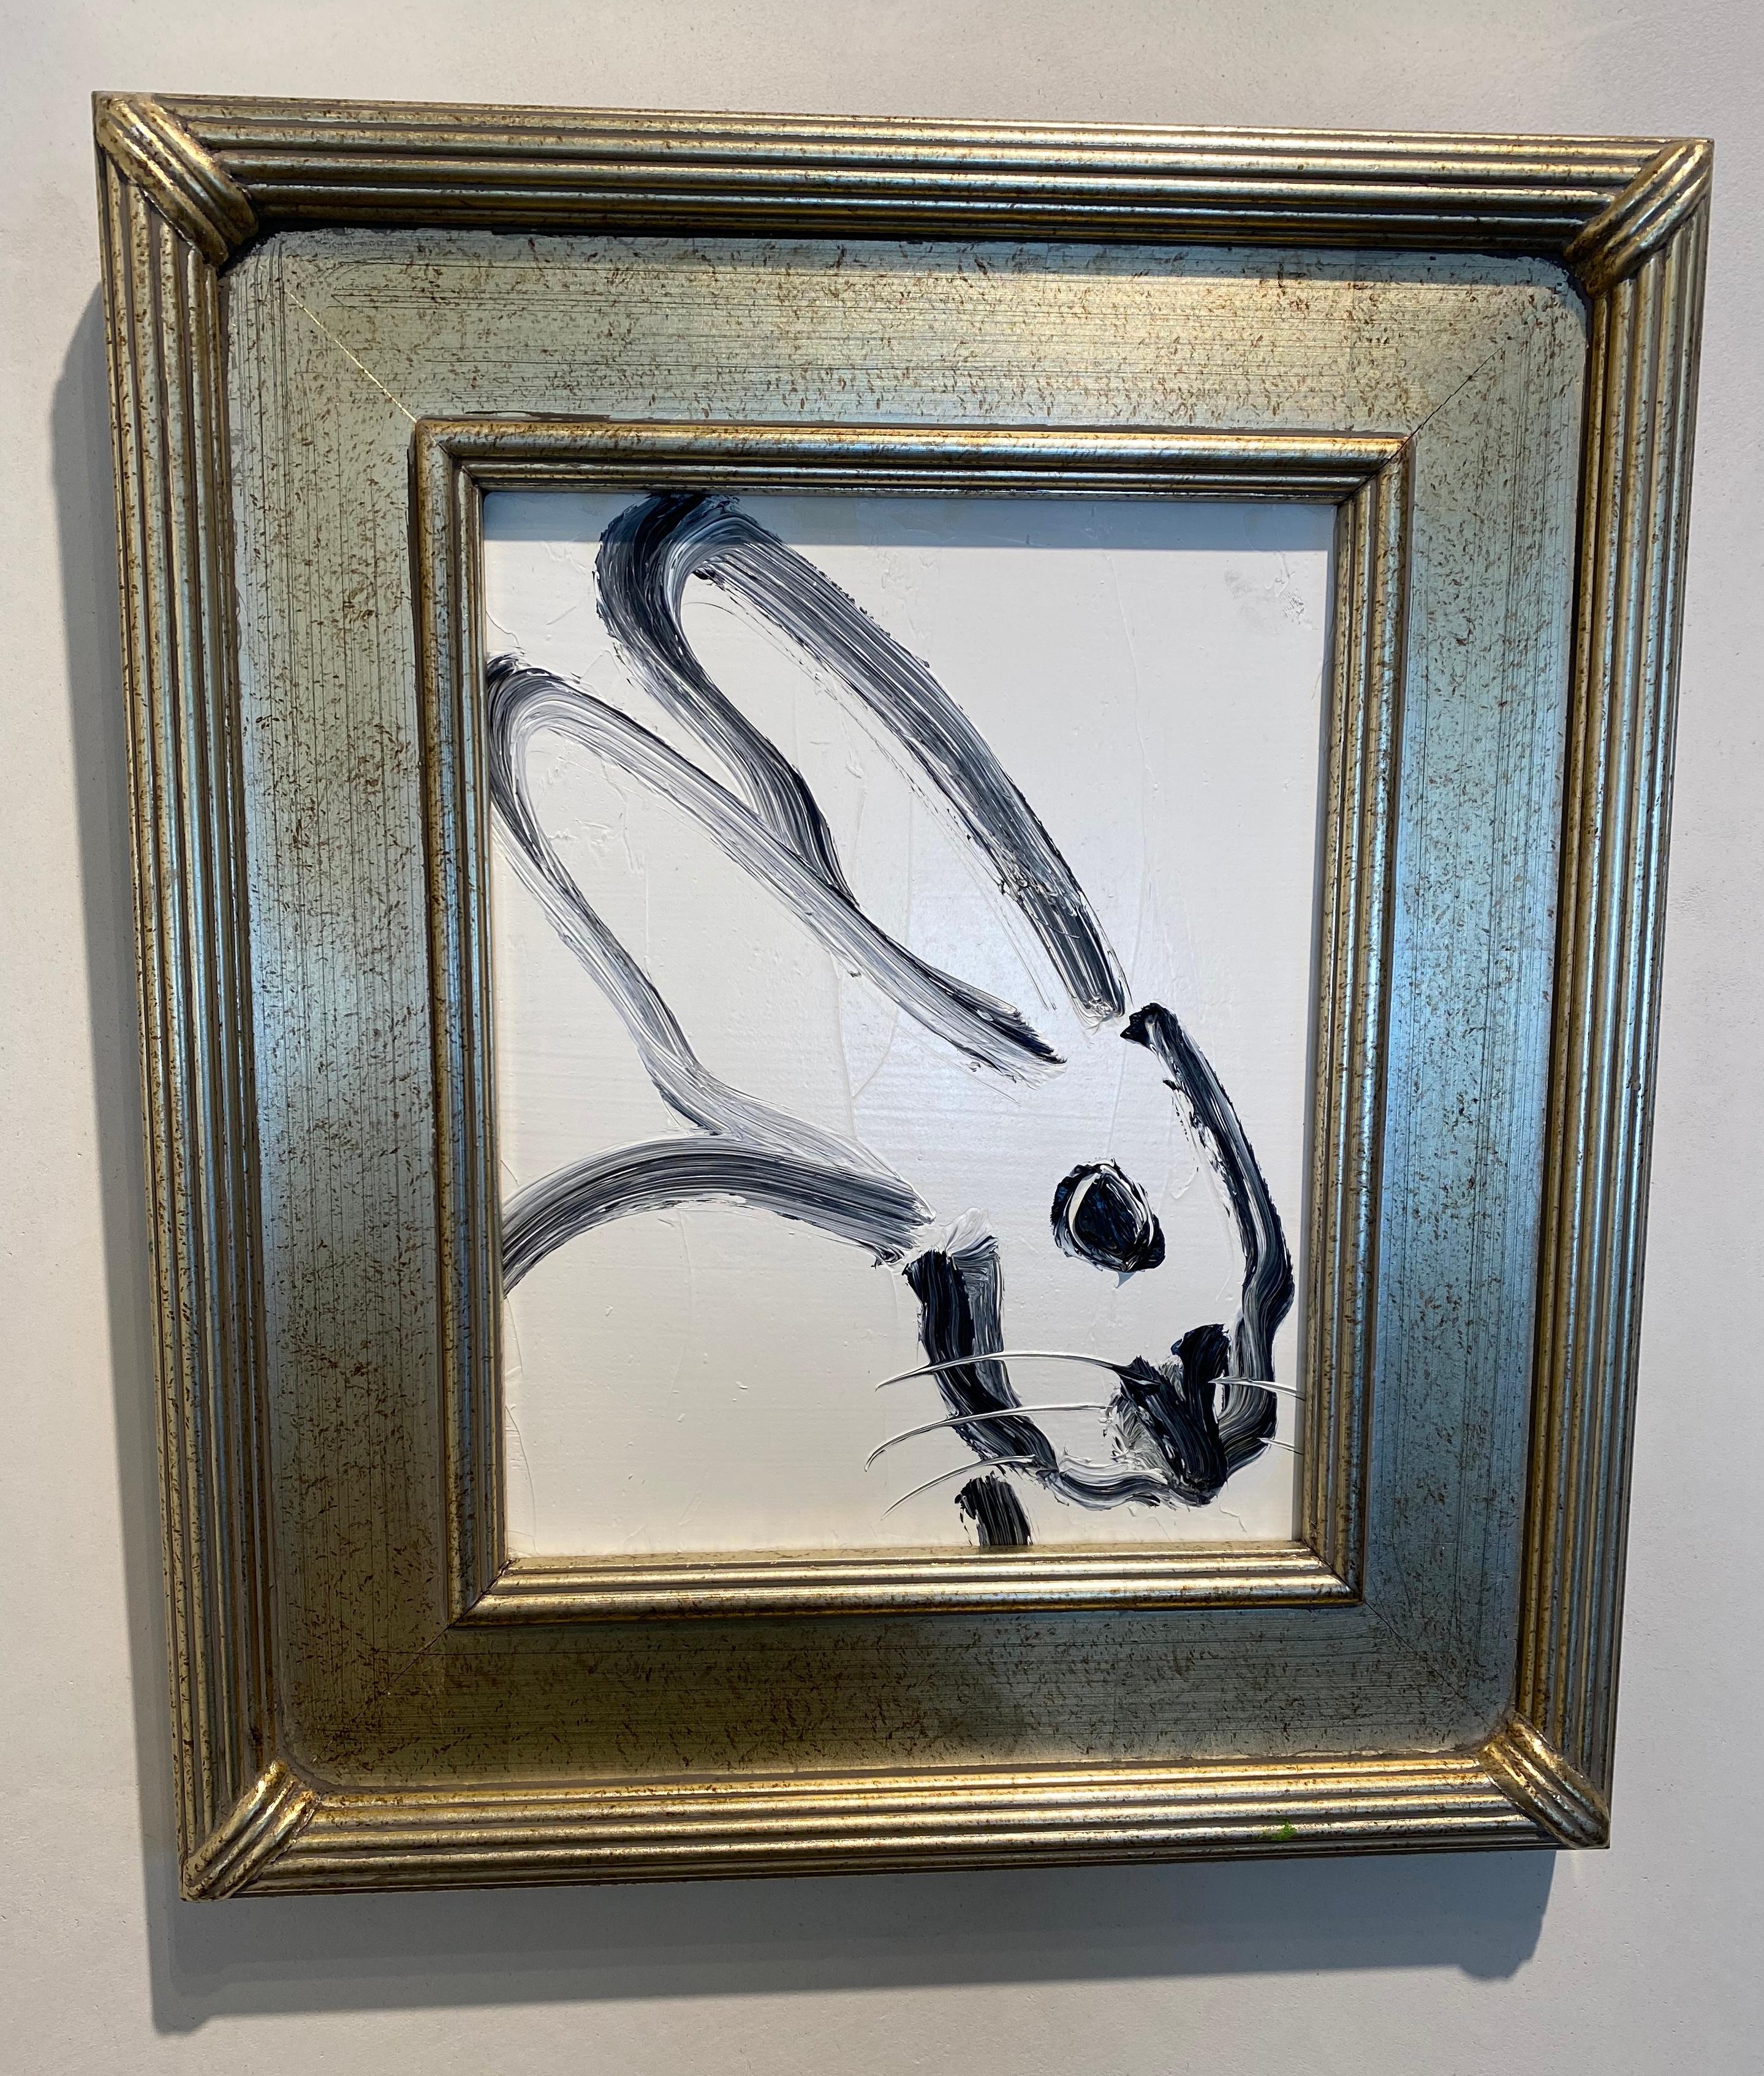 Profile- black and white gestural bunny by Neo- Expressionist Hunt Slonem 1